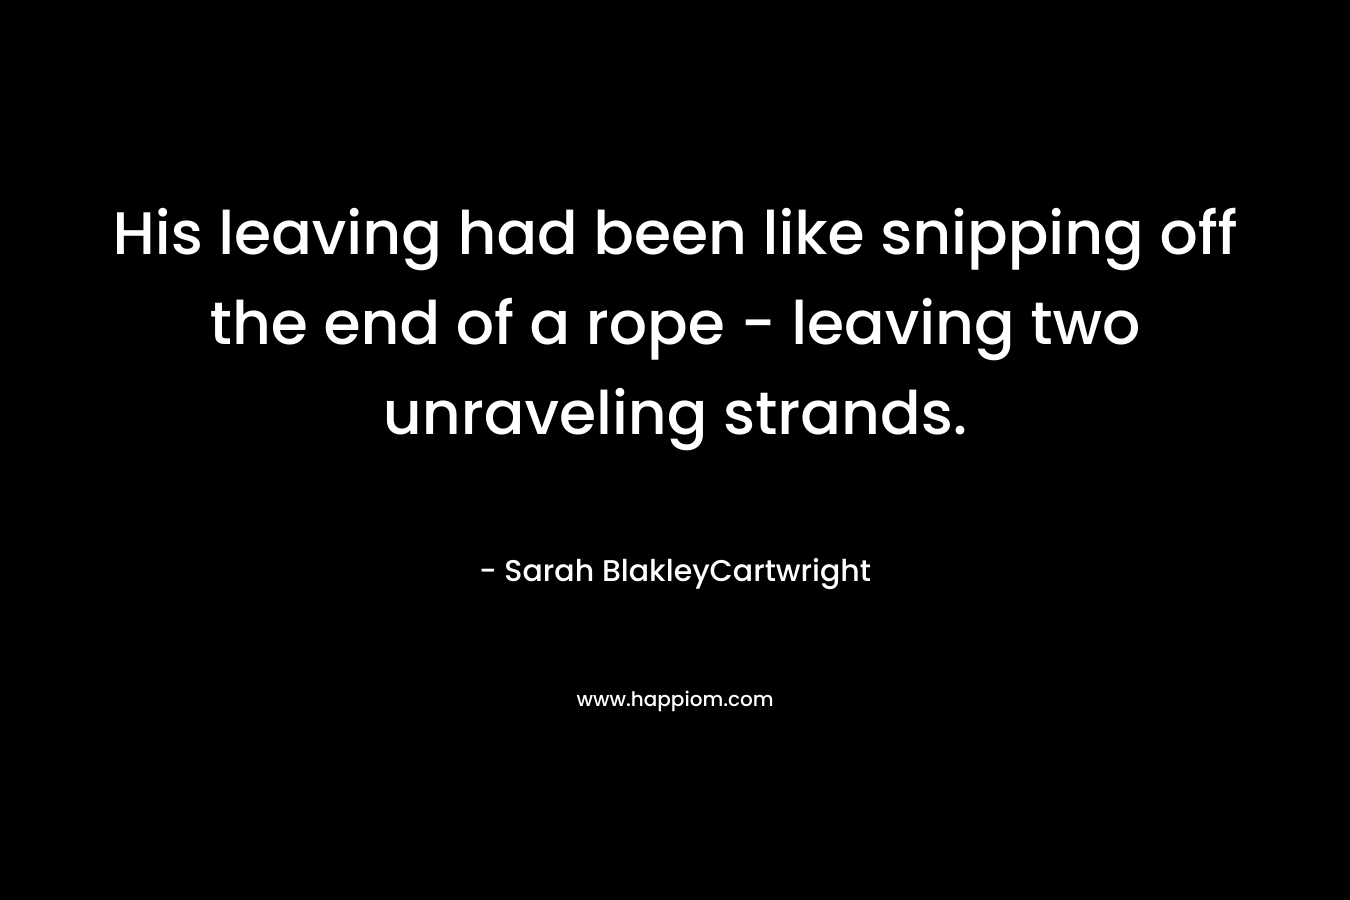 His leaving had been like snipping off the end of a rope - leaving two unraveling strands.